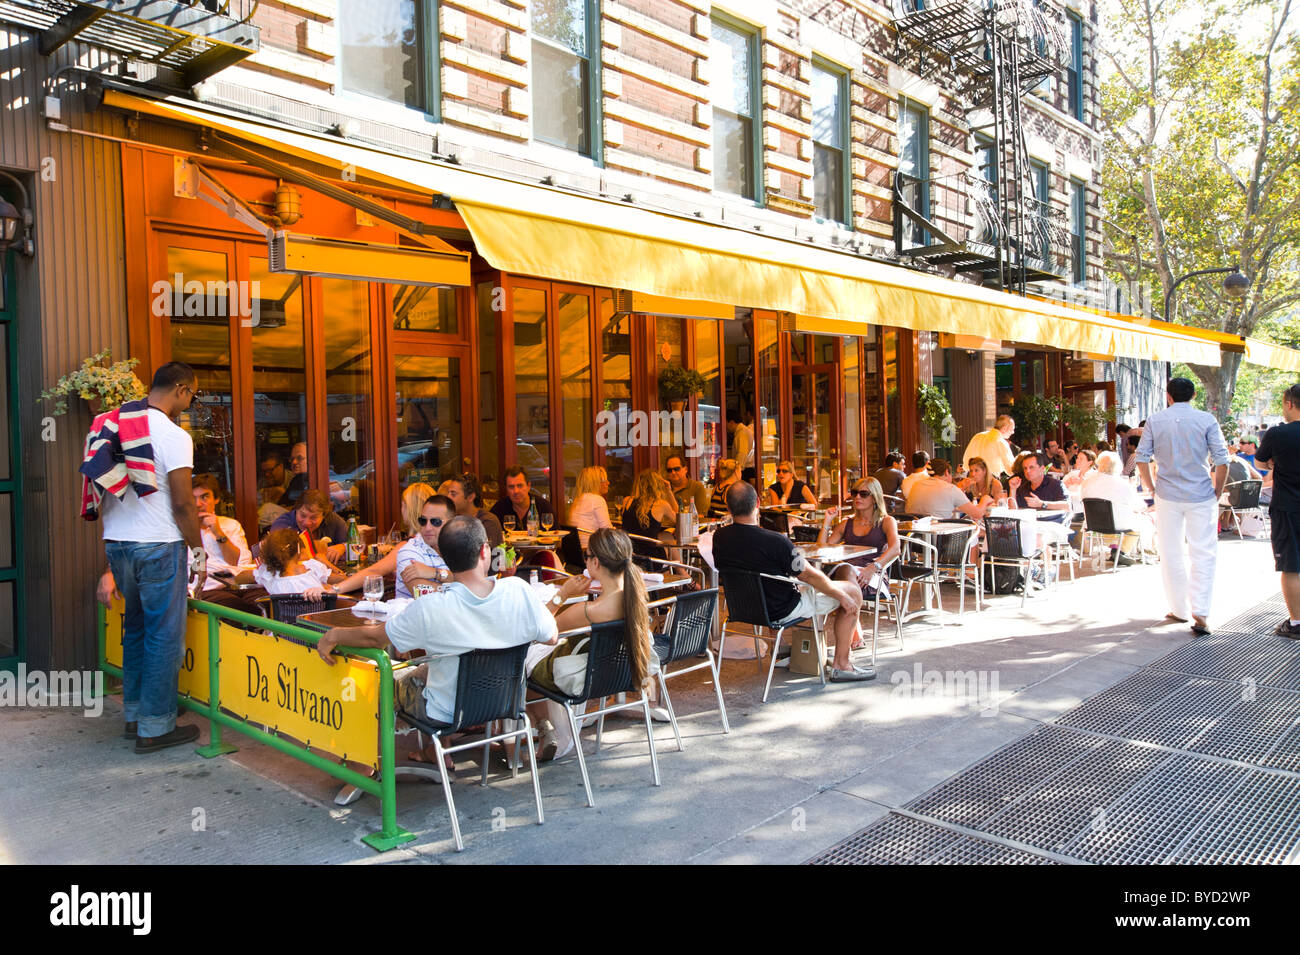 Italian restaurant on Avenue of the Americas in Greenwich Village, New York City, USA Stock Photo